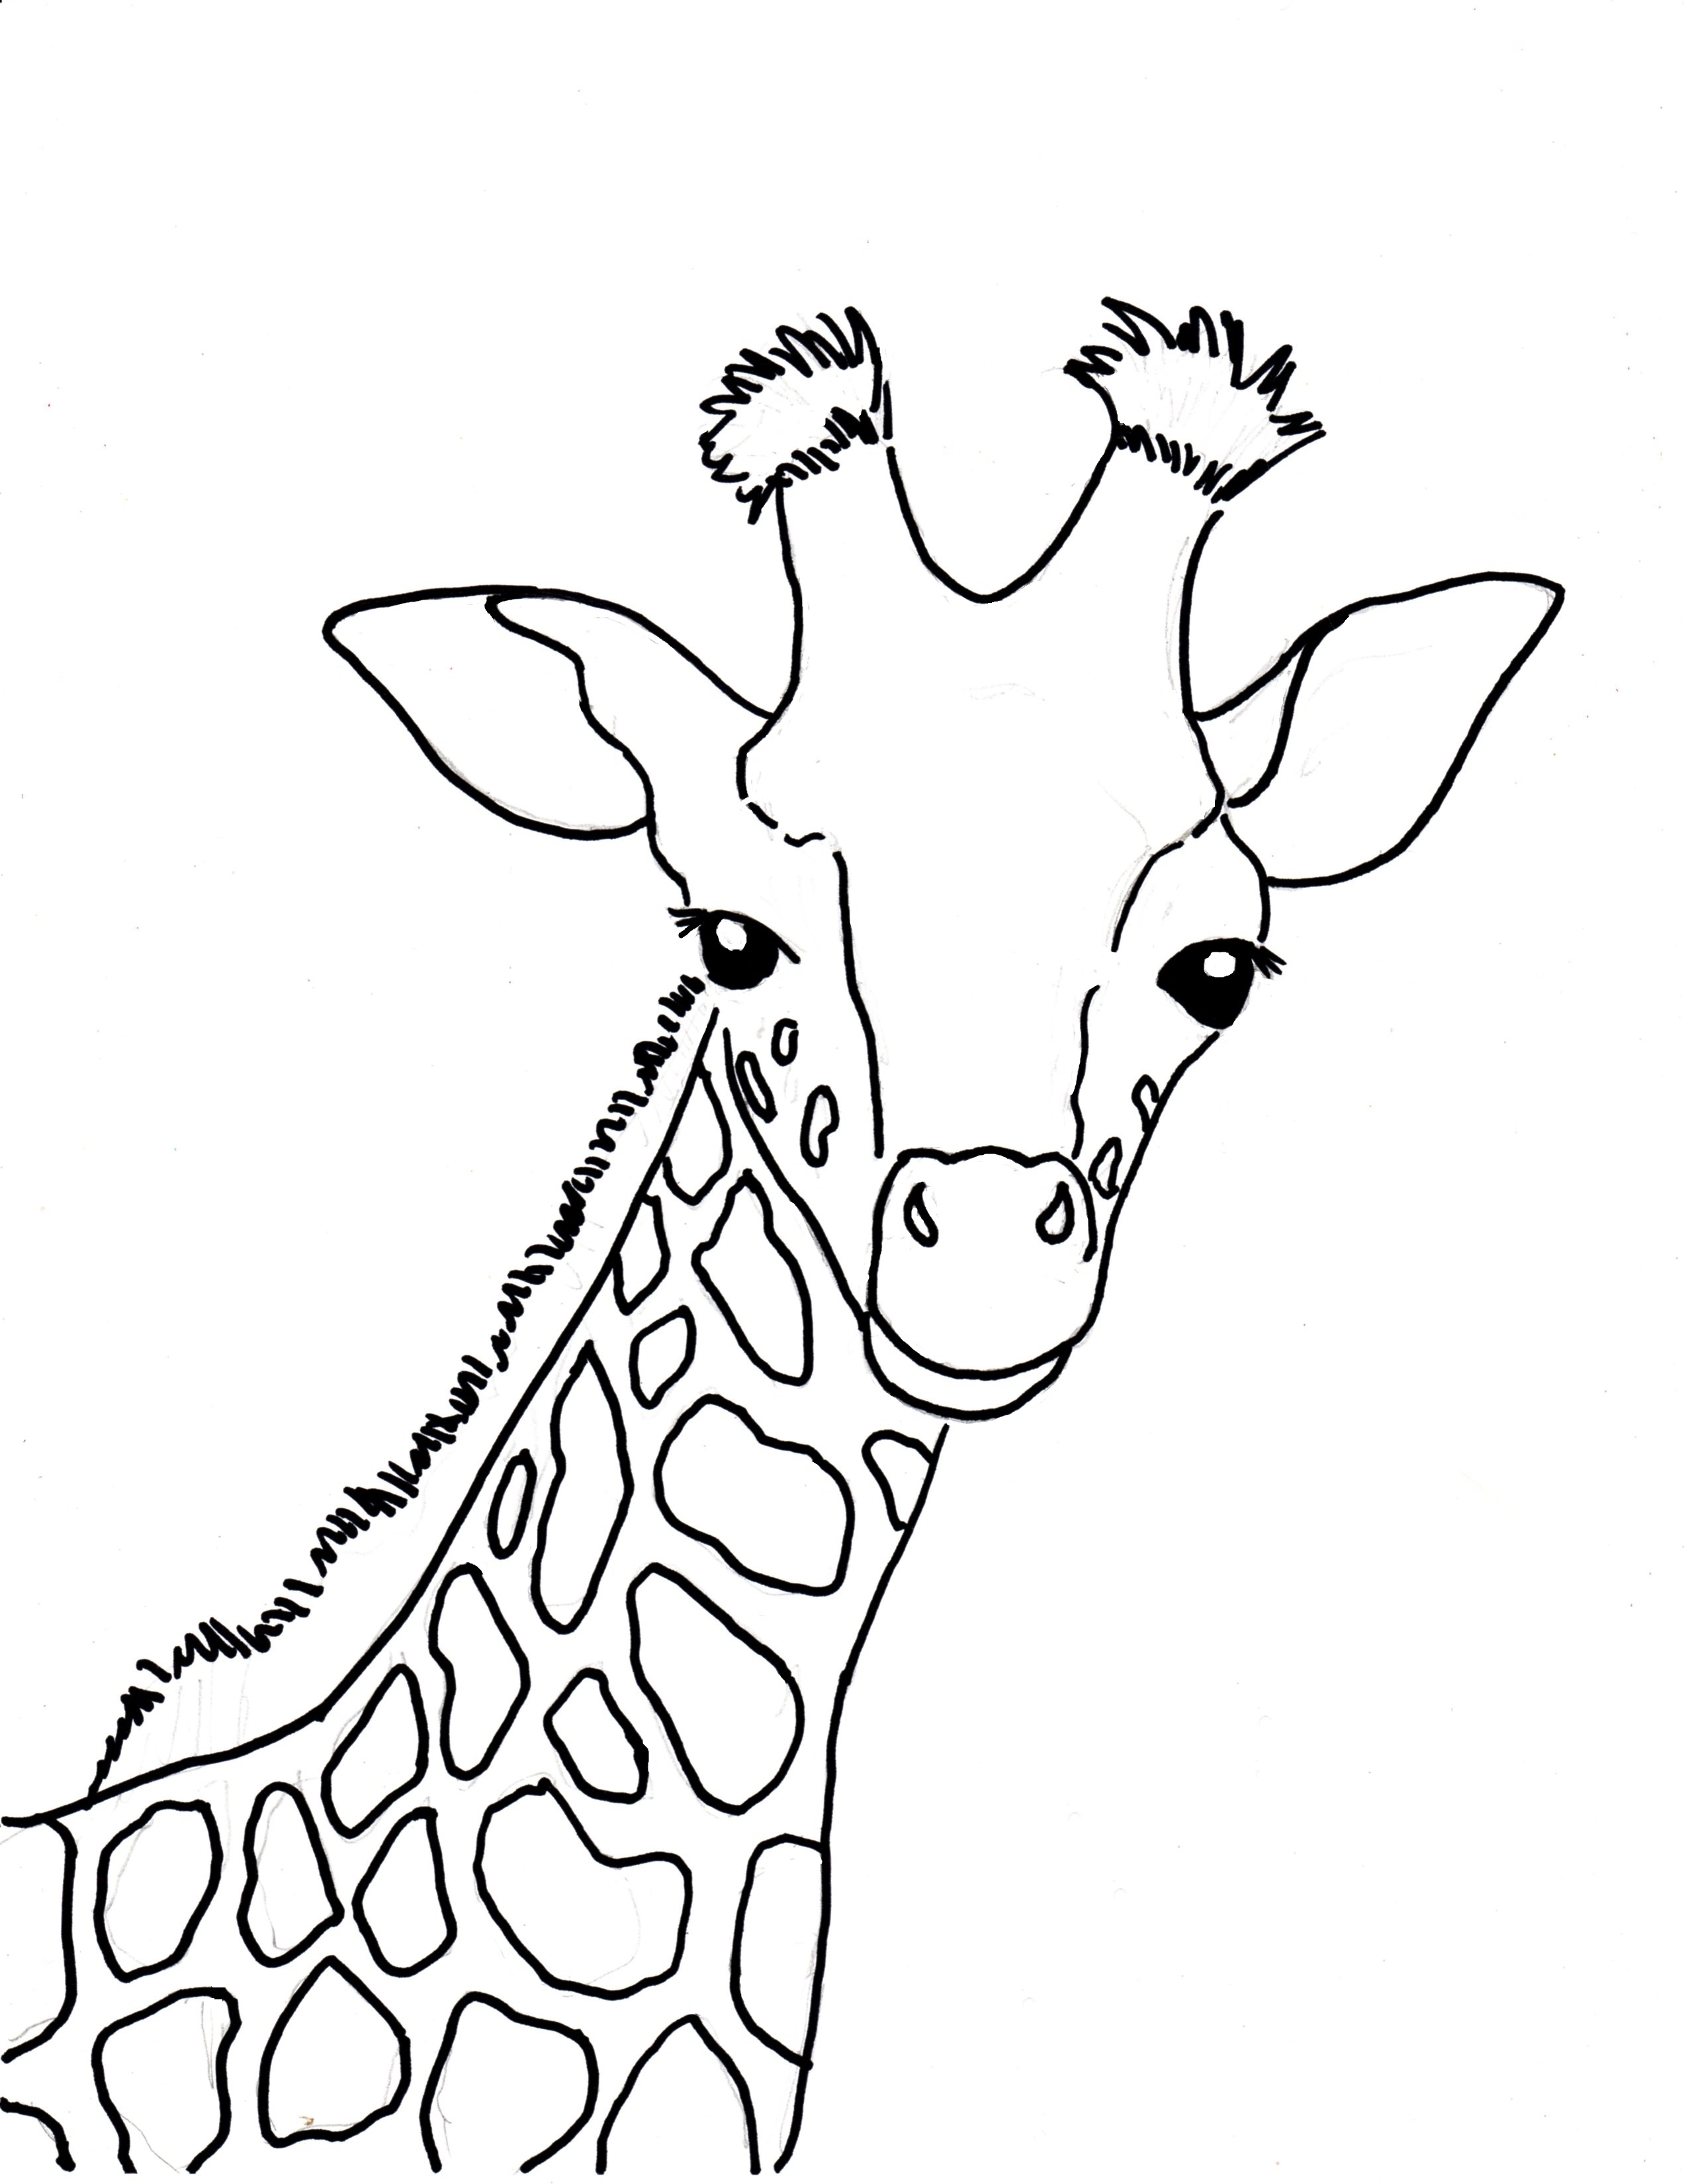 Funny Giraffe Coloring Pages At Getcolorings.com | Free Printable